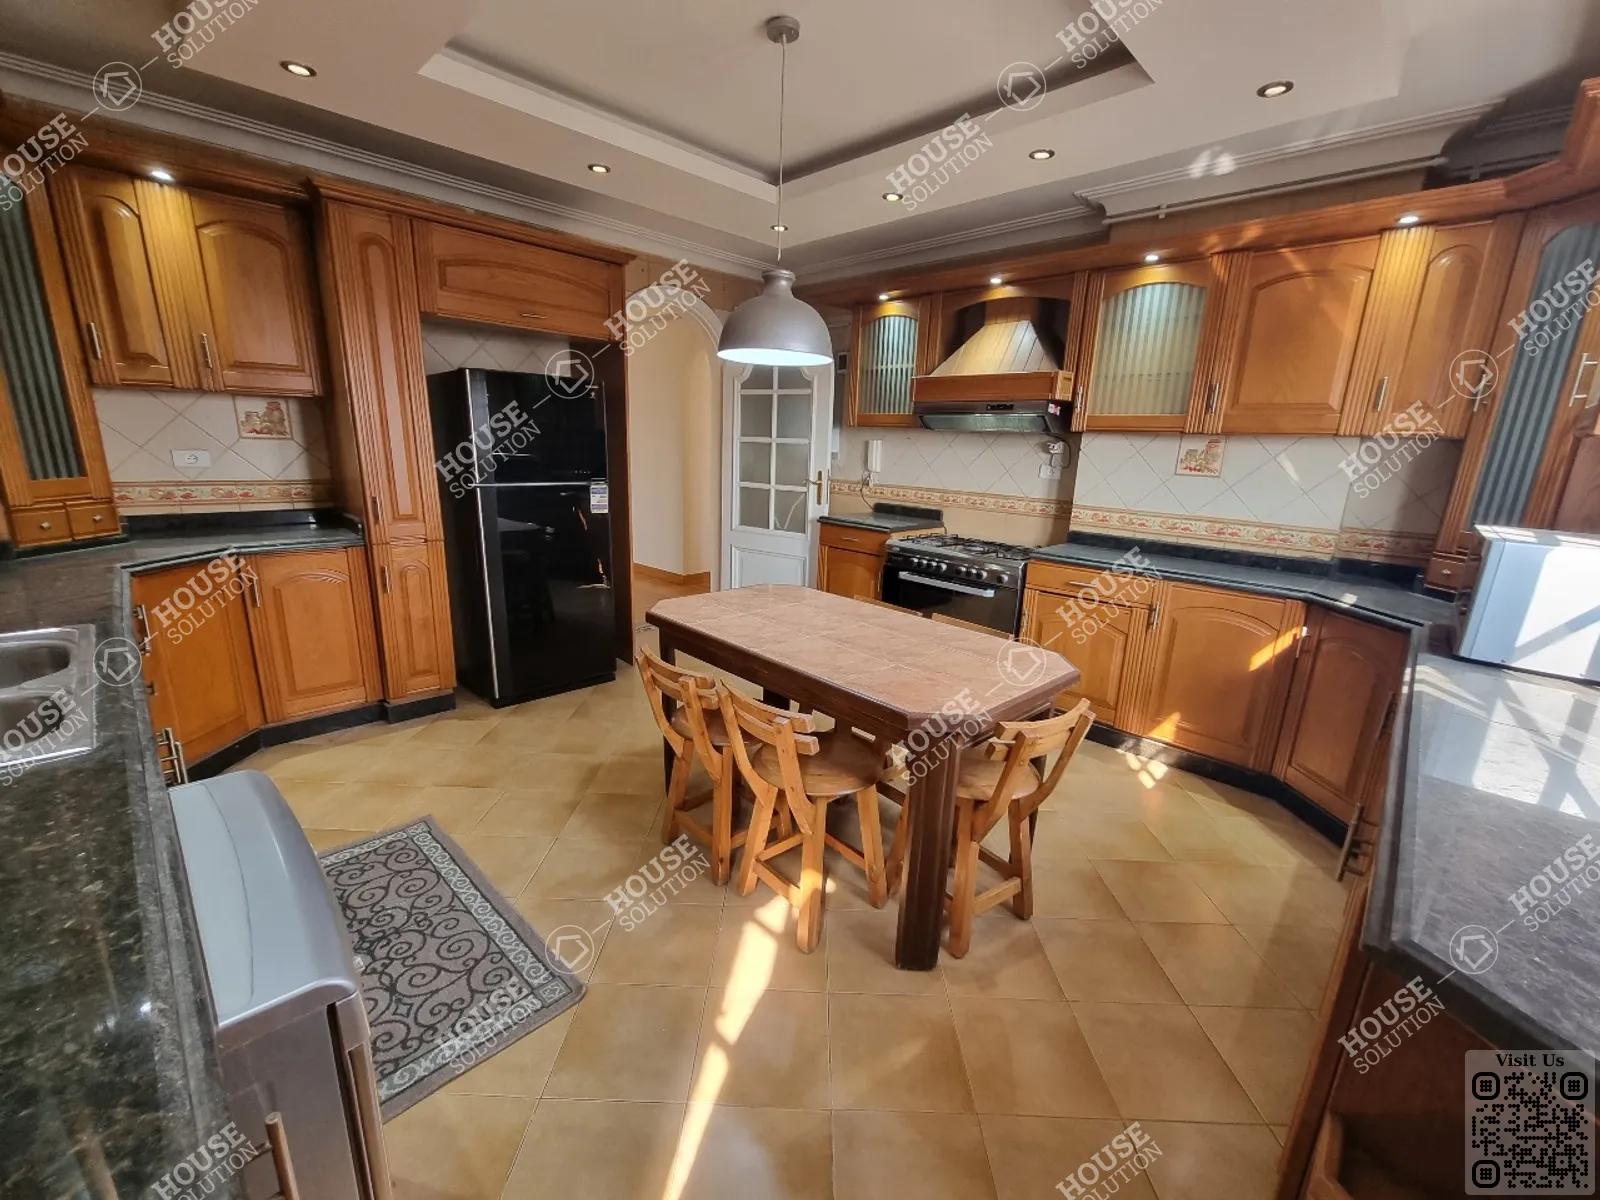 KITCHEN  @ Apartments For Rent In Maadi Maadi Sarayat Area: 245 m² consists of 4 Bedrooms 4 Bathrooms Modern furnished 5 stars #5782-2